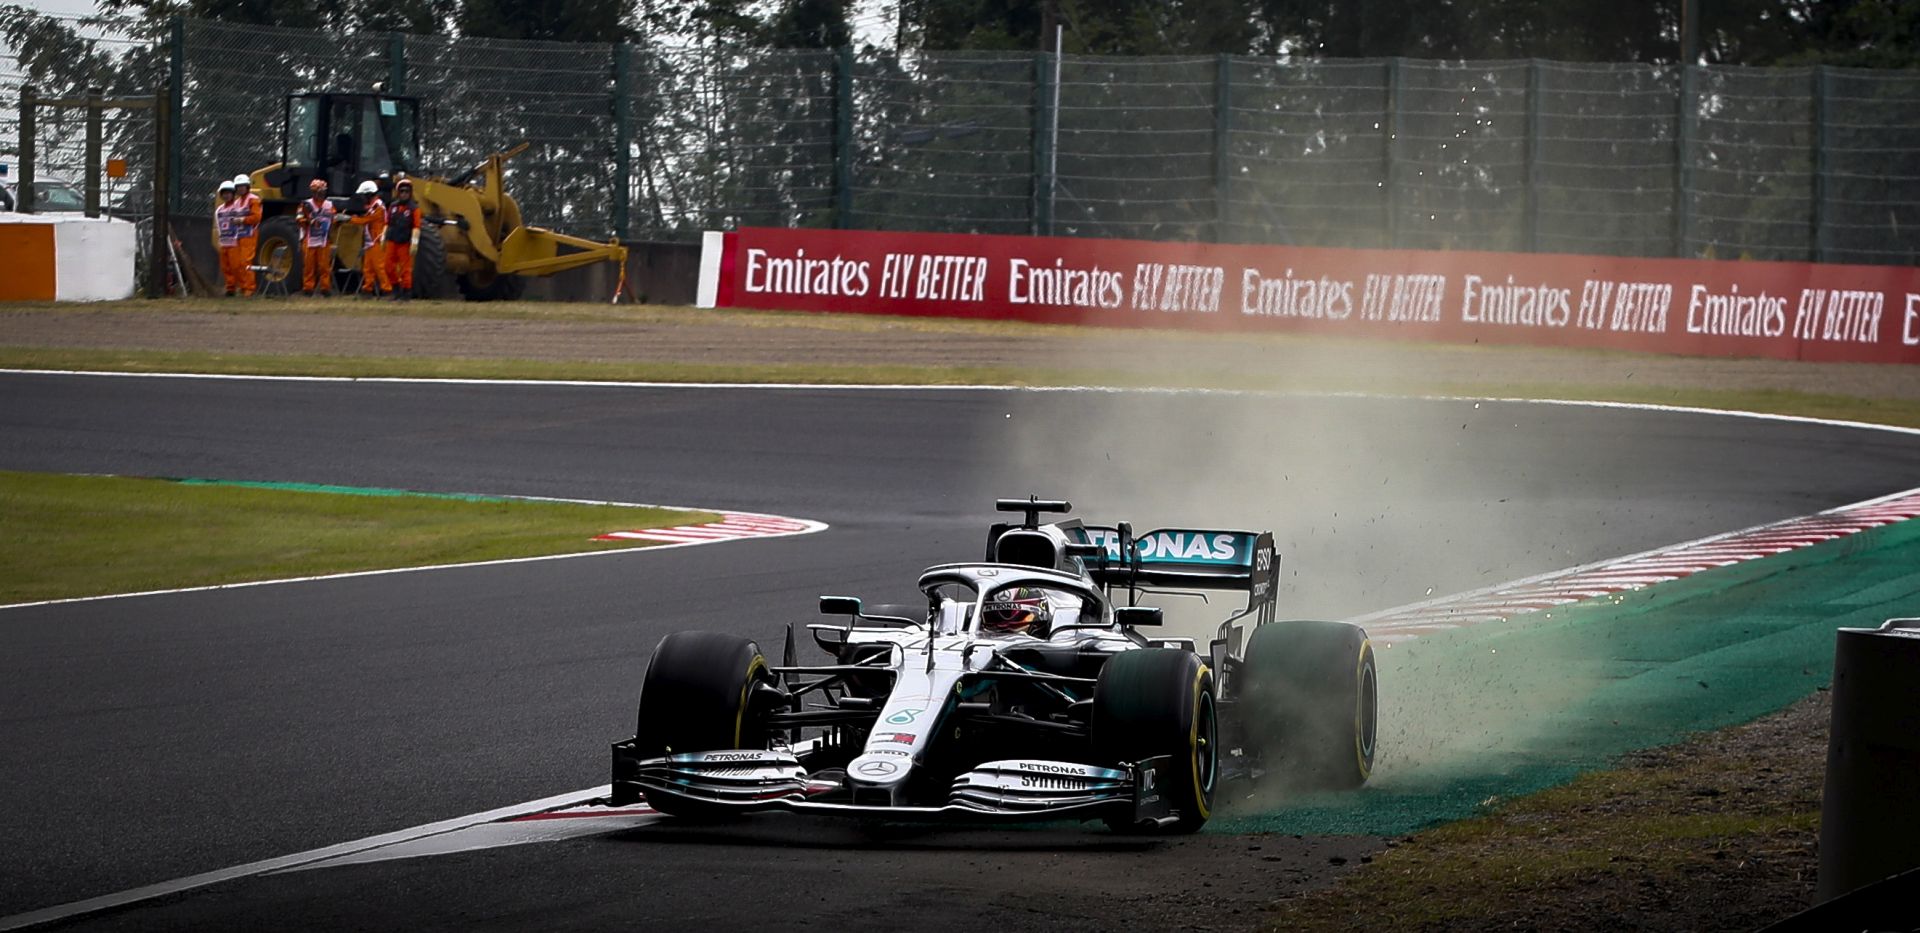 epa07911870 British Formula One driver Lewis Hamilton of Mercedes AMG GP drives off the track during the first practice session ahead of the Japanese Formula One Grand Prix in Suzuka, Japan, 11 October 2019. The Japanese Formula One Grand Prix will take place on 13 October 2019.  EPA/DIEGO AZUBEL